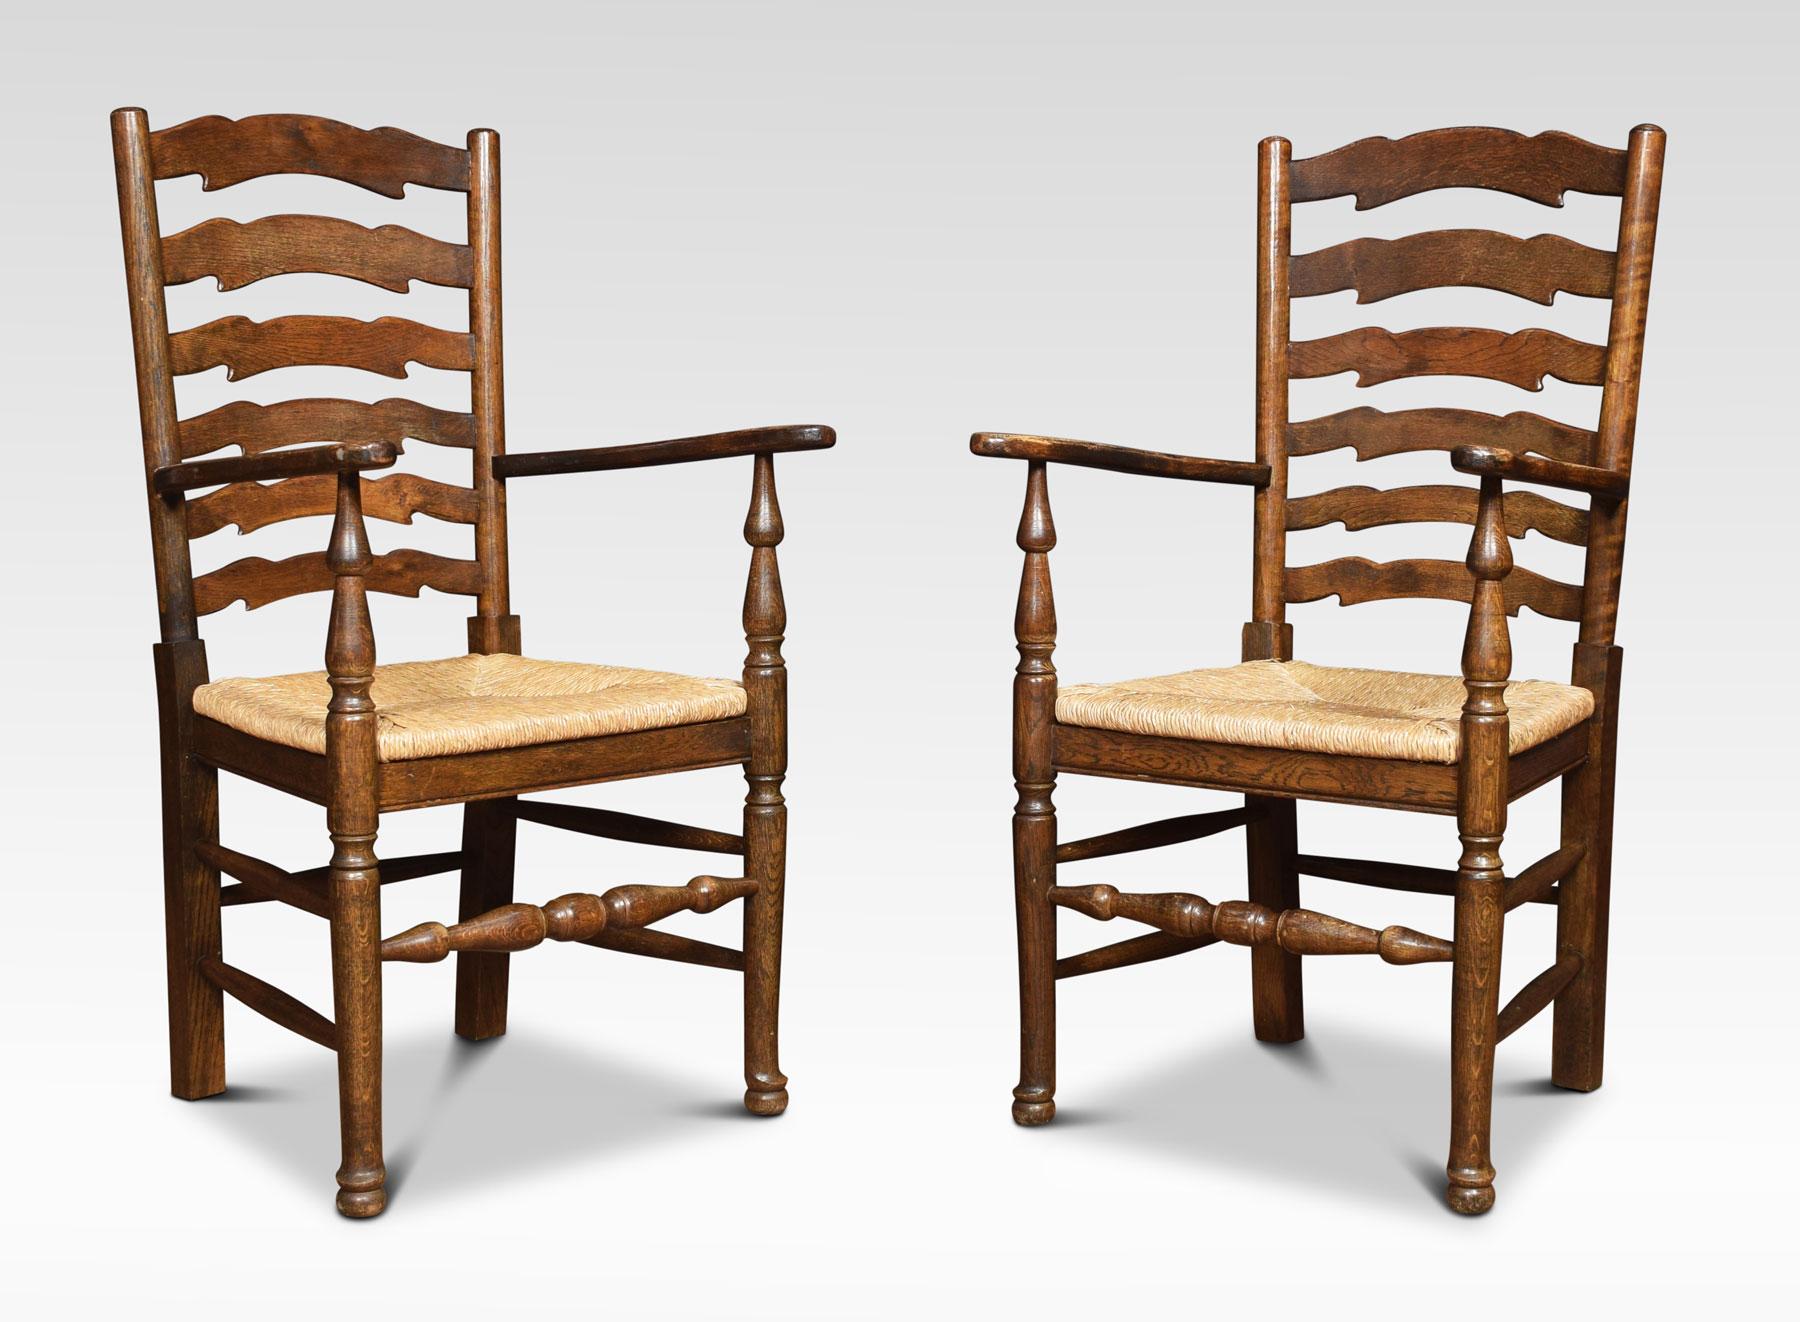 A set of eight wavy ladder back oak dining chairs comprising of two armchairs and six chairs, The wavy ladder backs with rush seats on turned front legs united by stretchers.
Dimensions:
Armchairs
Height 41 inches height to seat 19 inches
Width 20